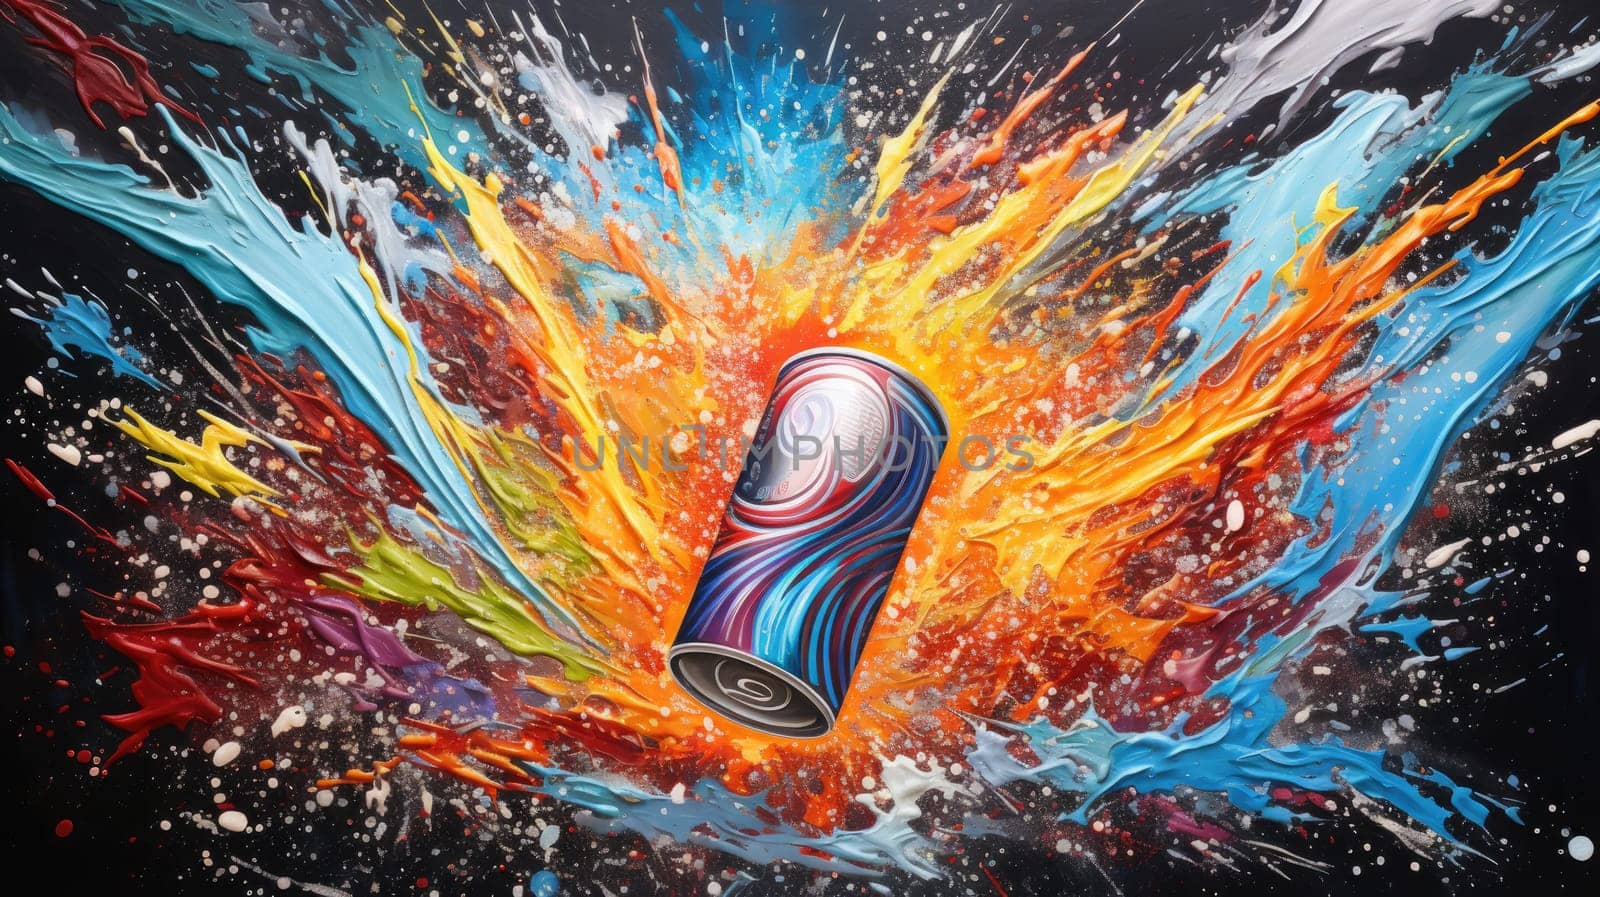 A powerful visual of an energy drink can amidst cosmic explosion of energy, stars and streaks of light surrounding it